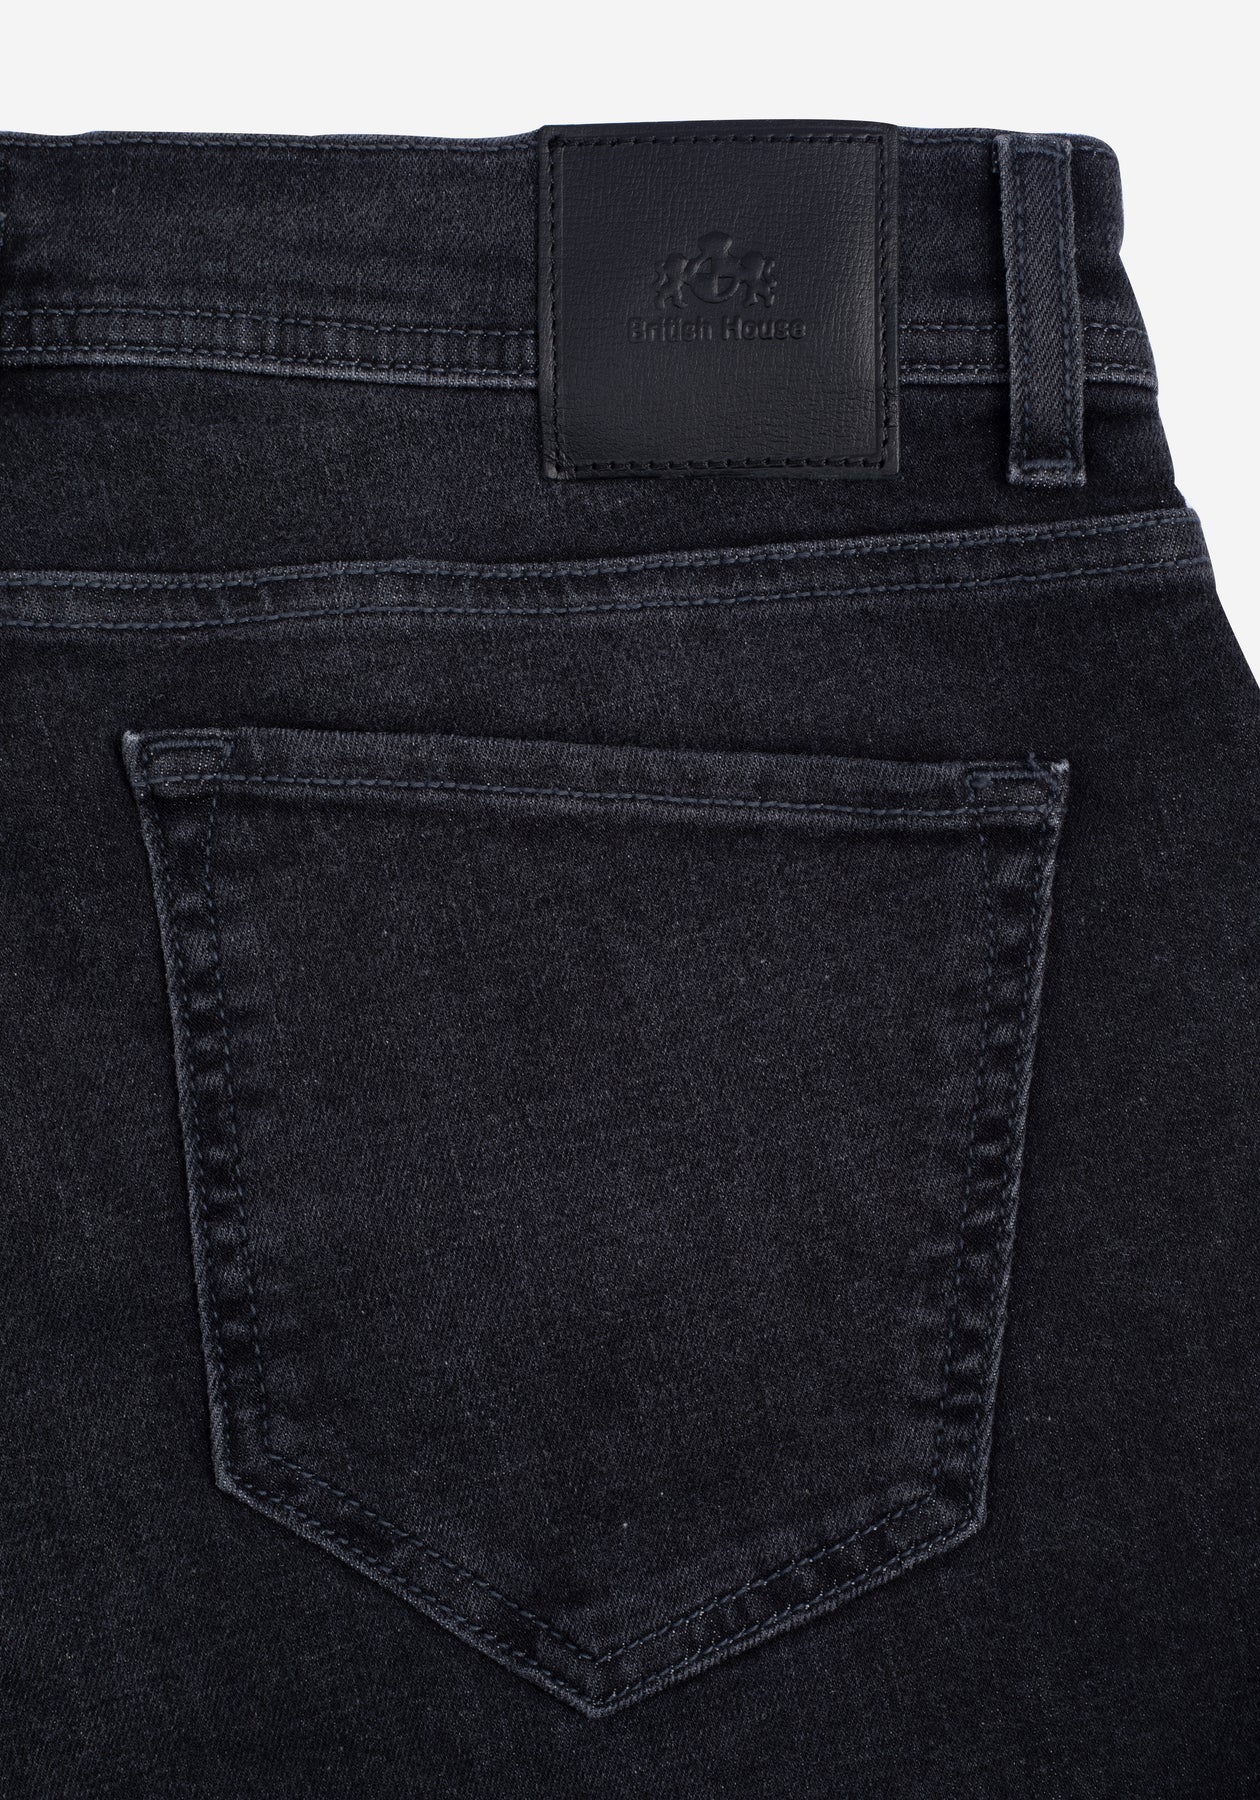 Contemporary-fit Washed Black Denim – British House